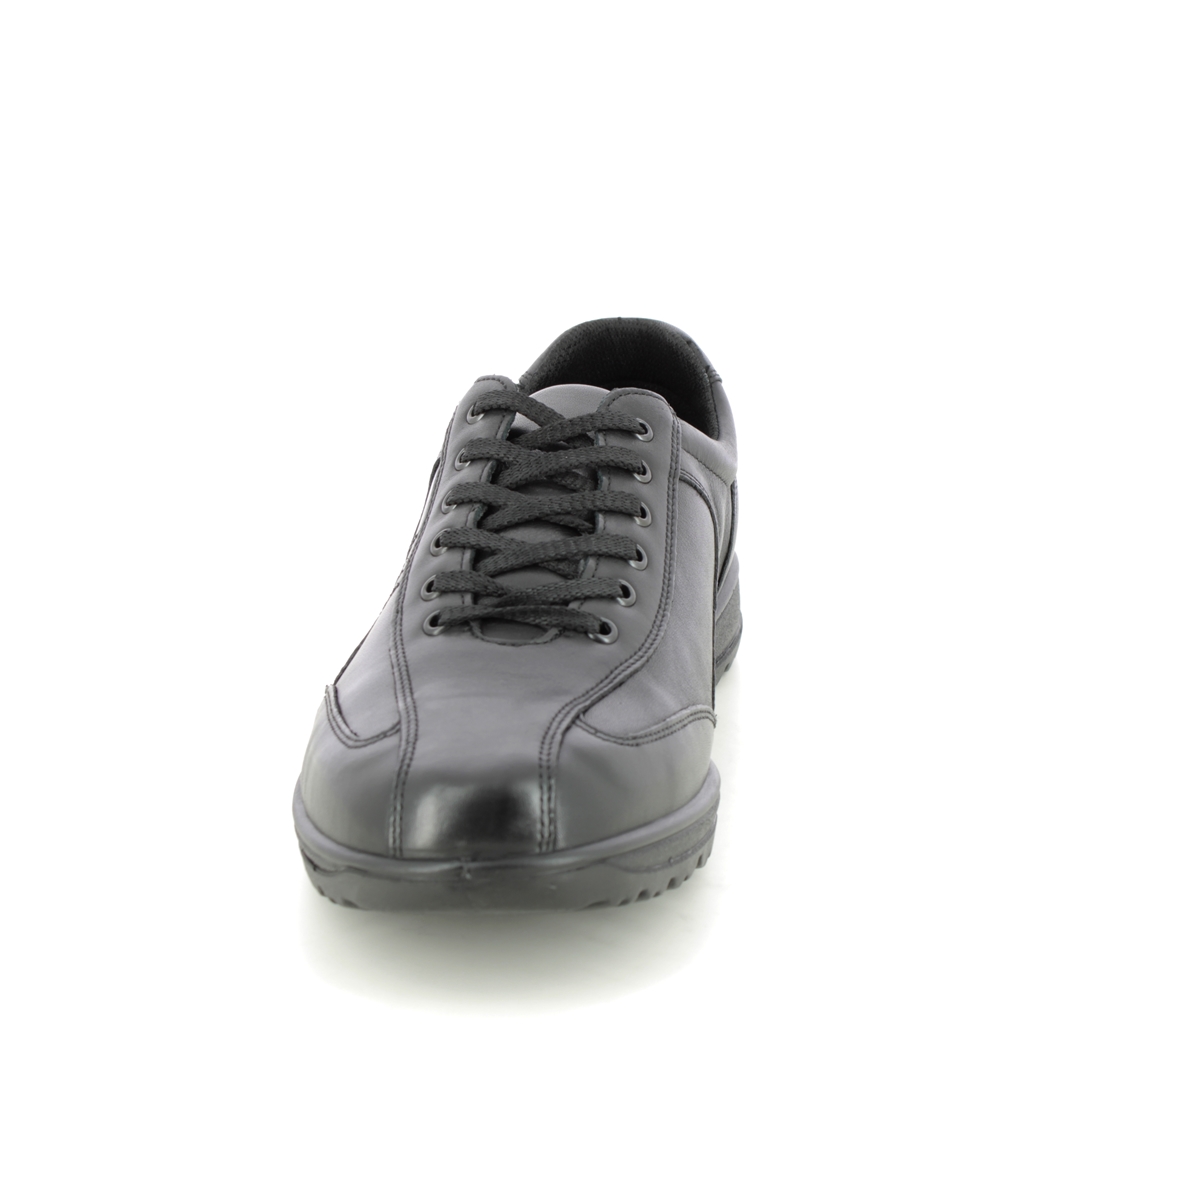 IMAC Relay Lace 1780-2290011 Black leather comfort shoes